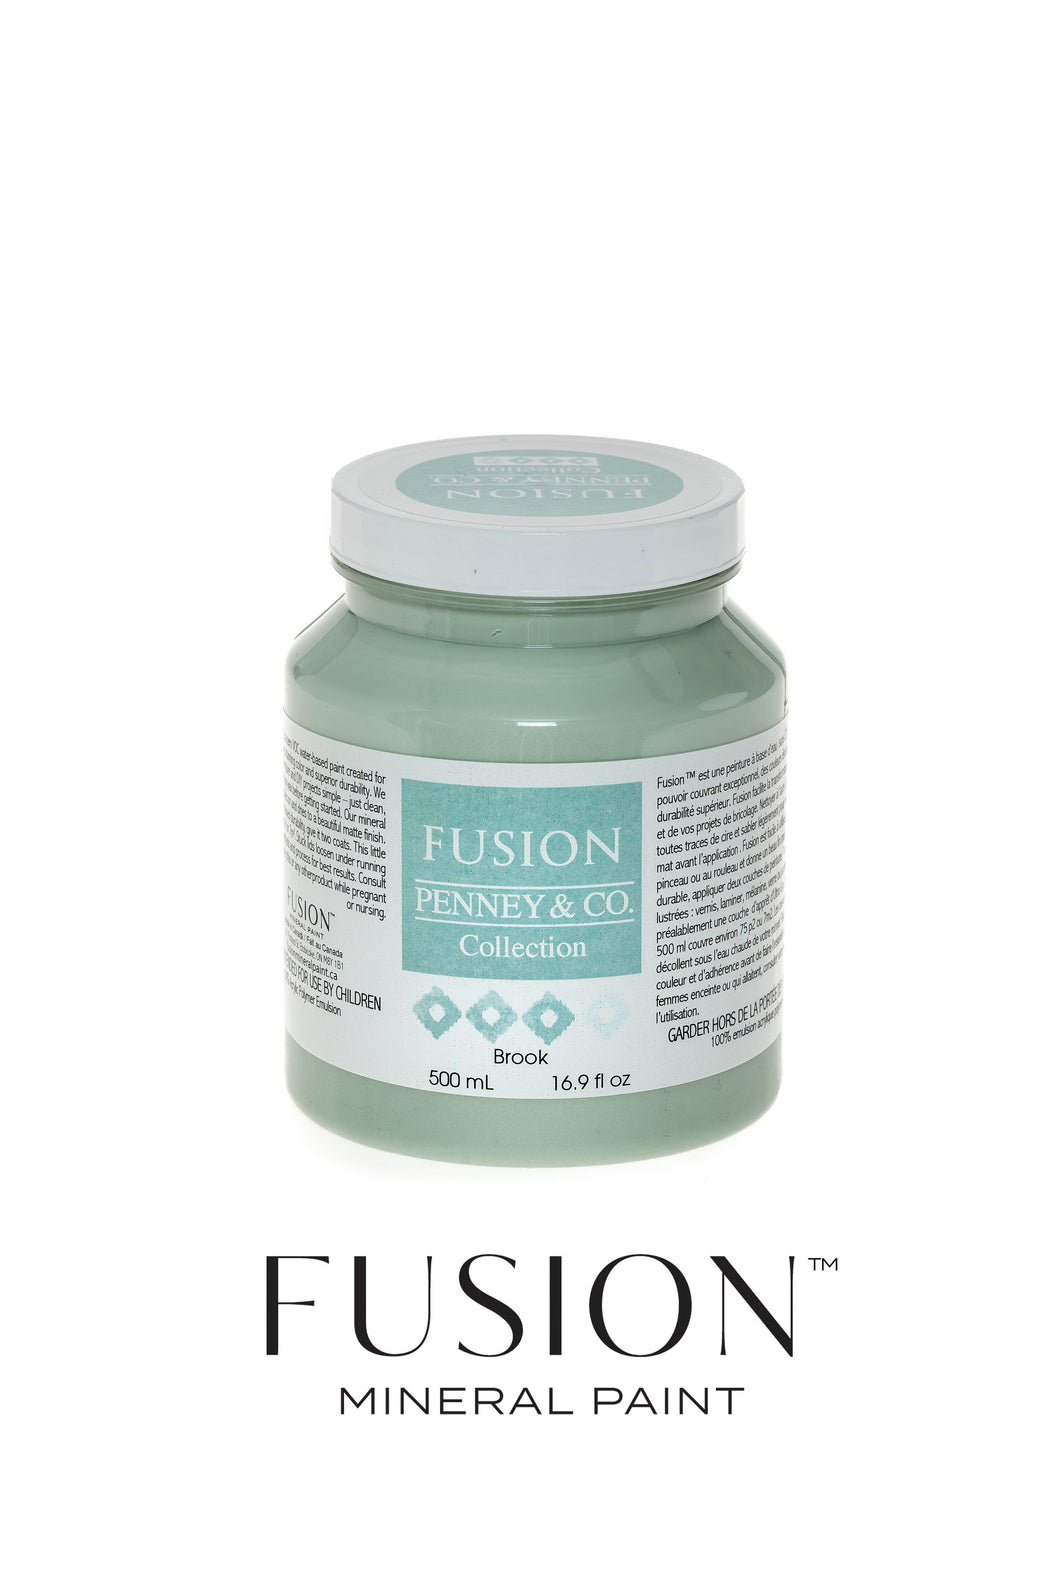 FUSION™ Mineral Paint - Brook 500ml